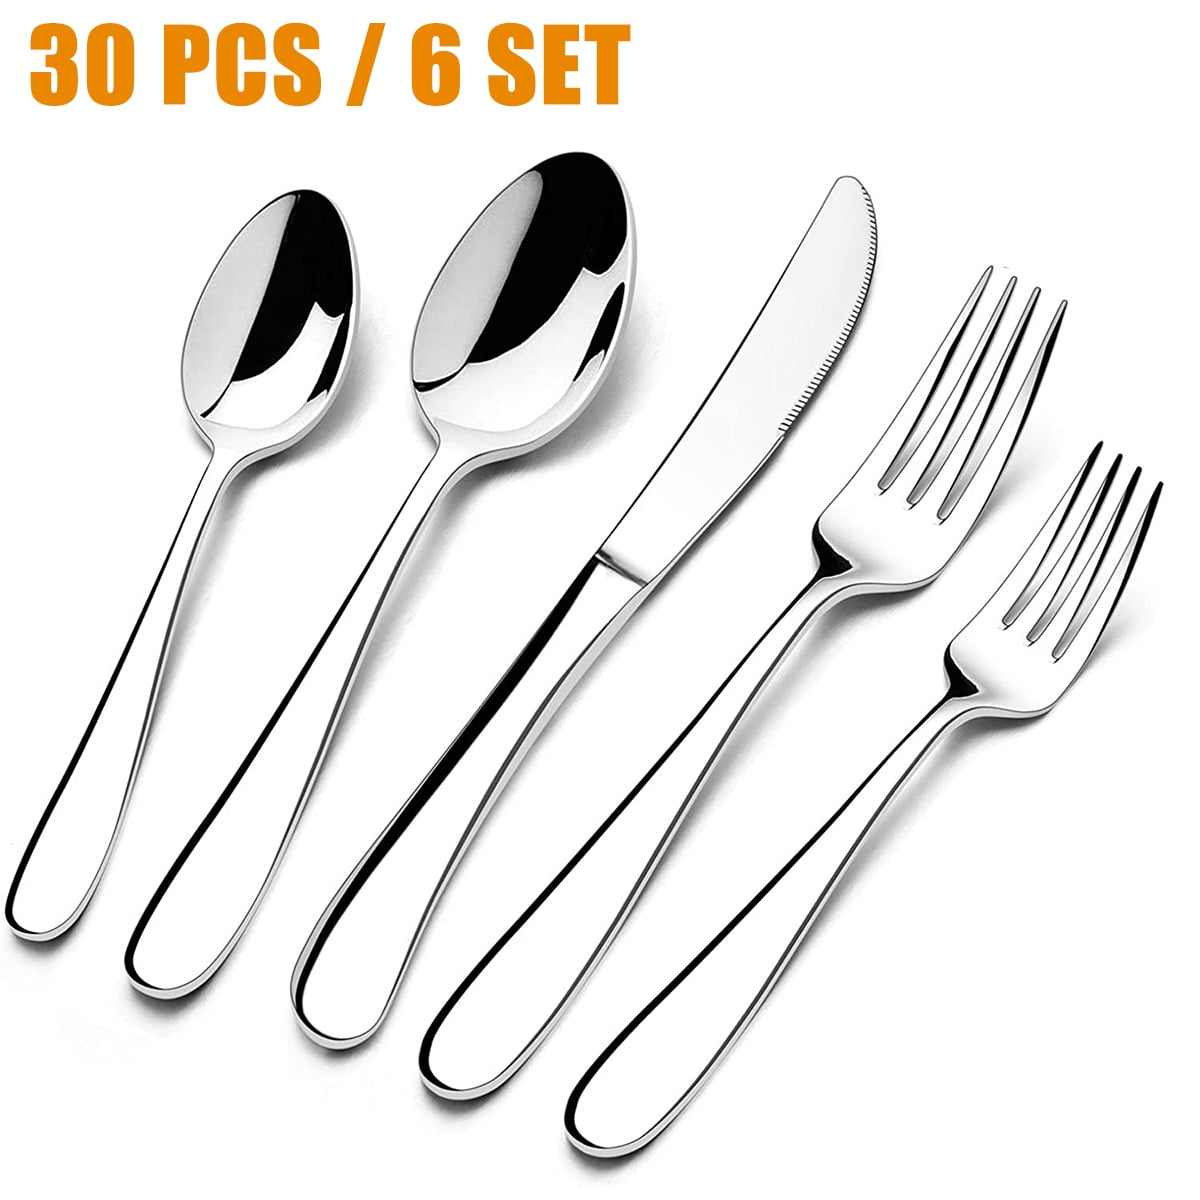 24 Piece Casual Living Stainless Steel Flatware Set Service for 6 